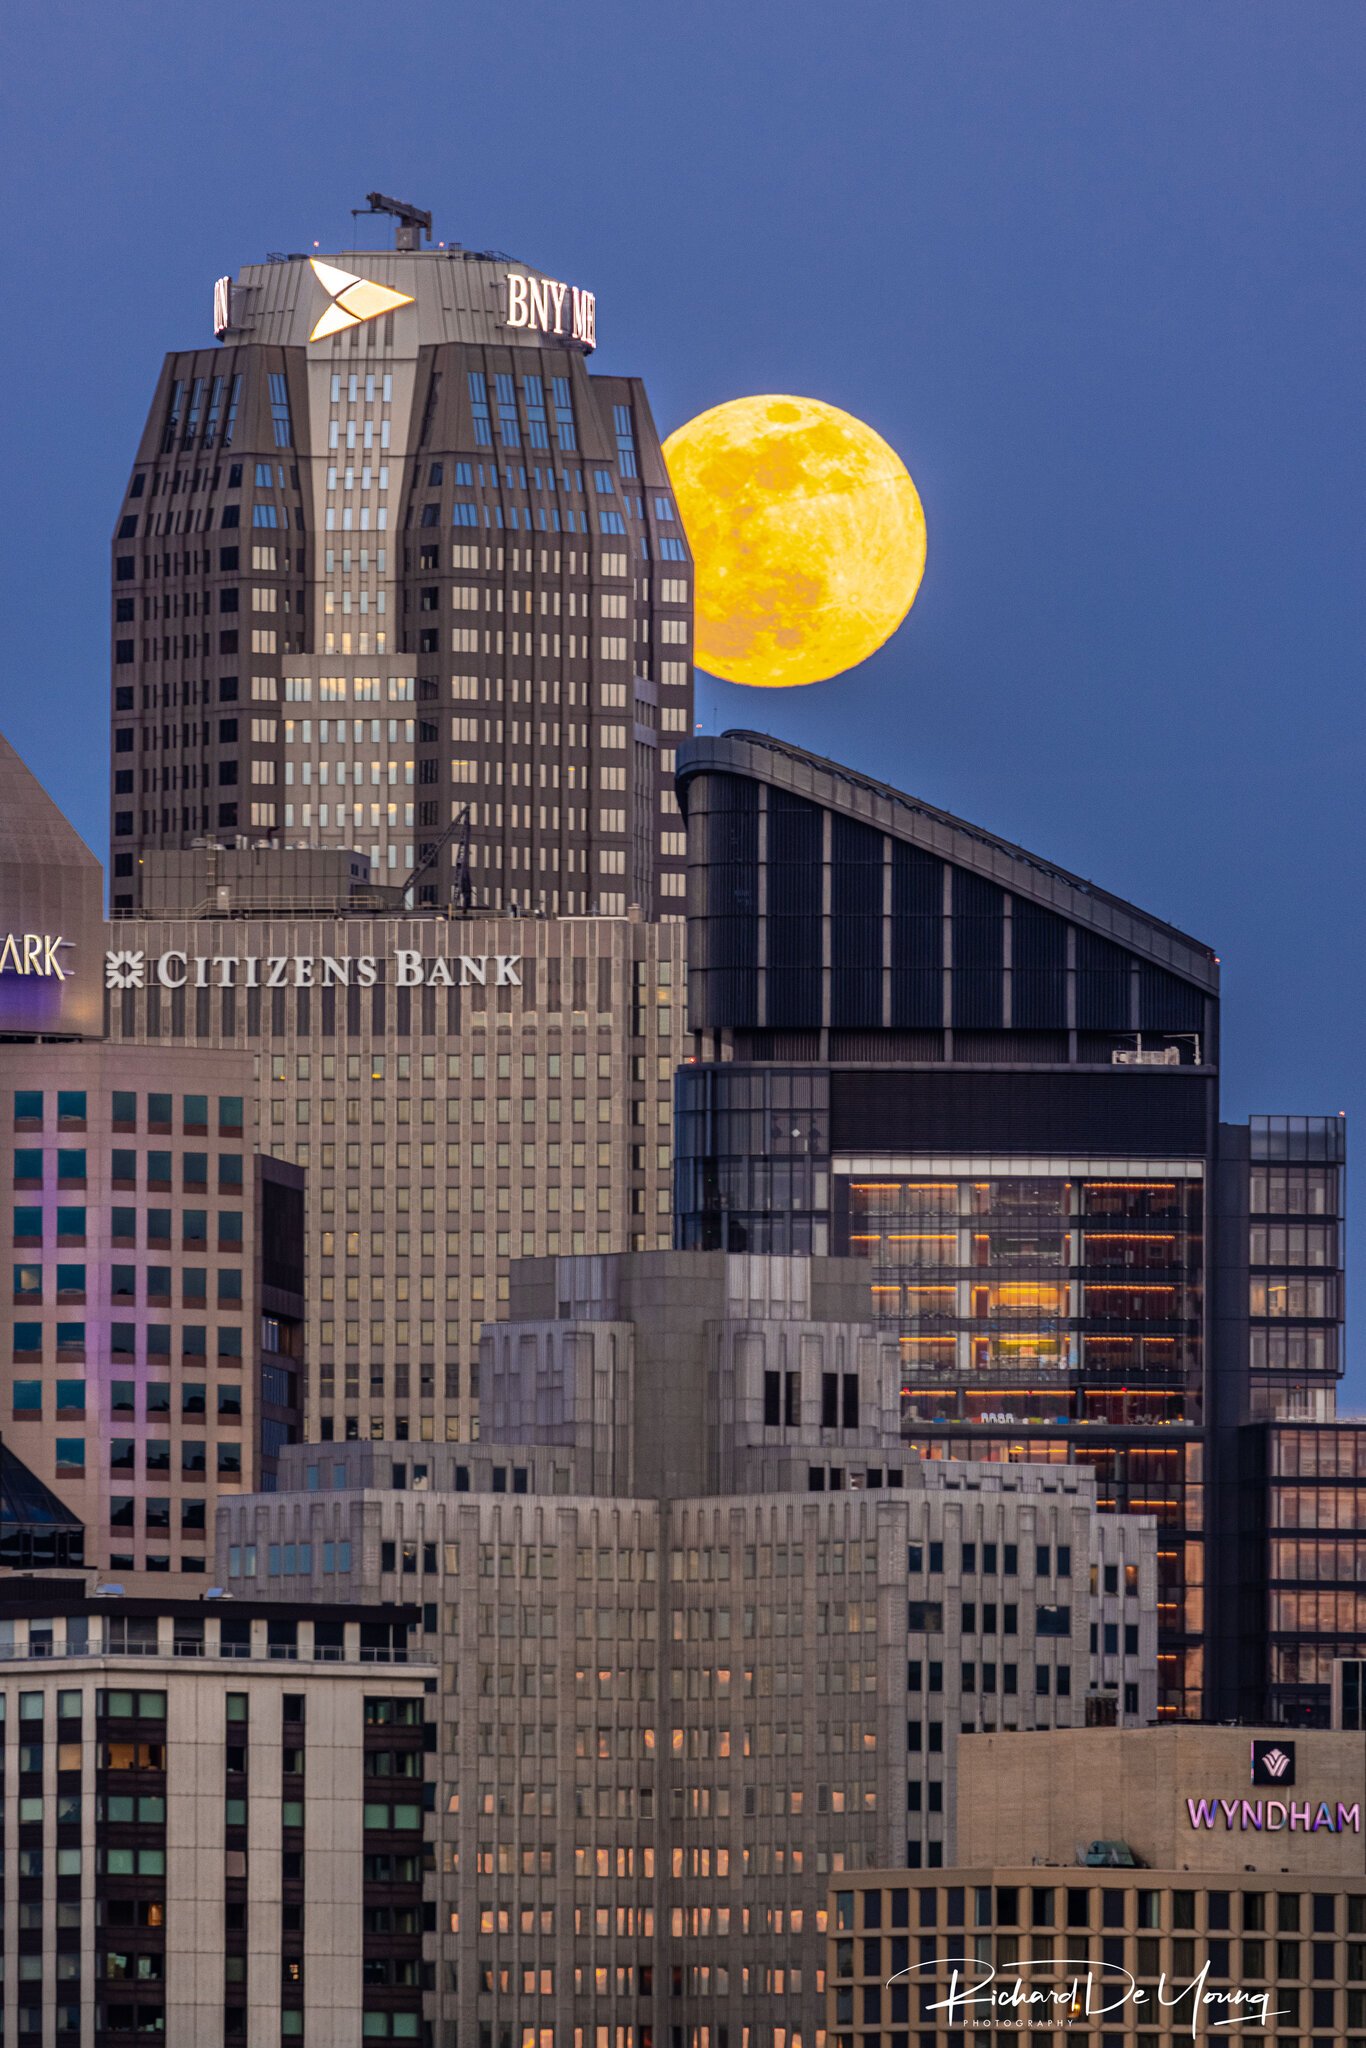 Pink Super Moon over Pittsburgh